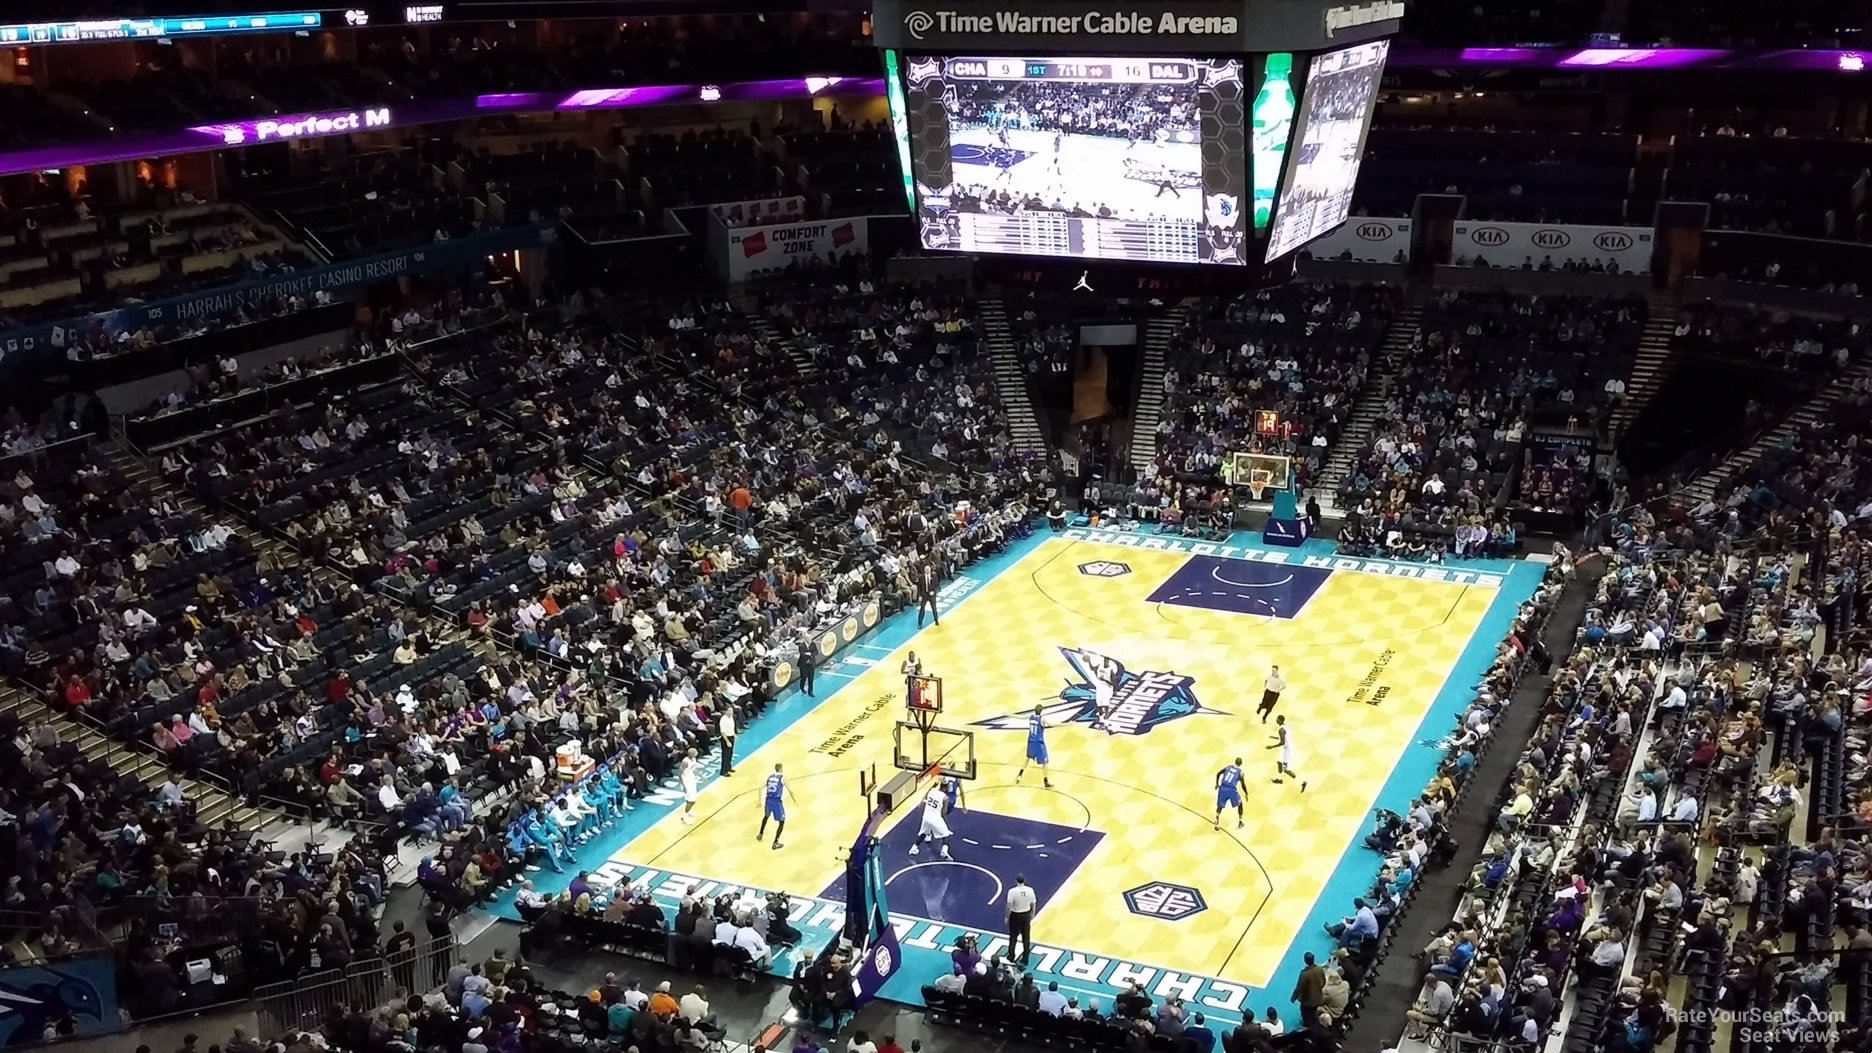 section 232 seat view  for basketball - spectrum center